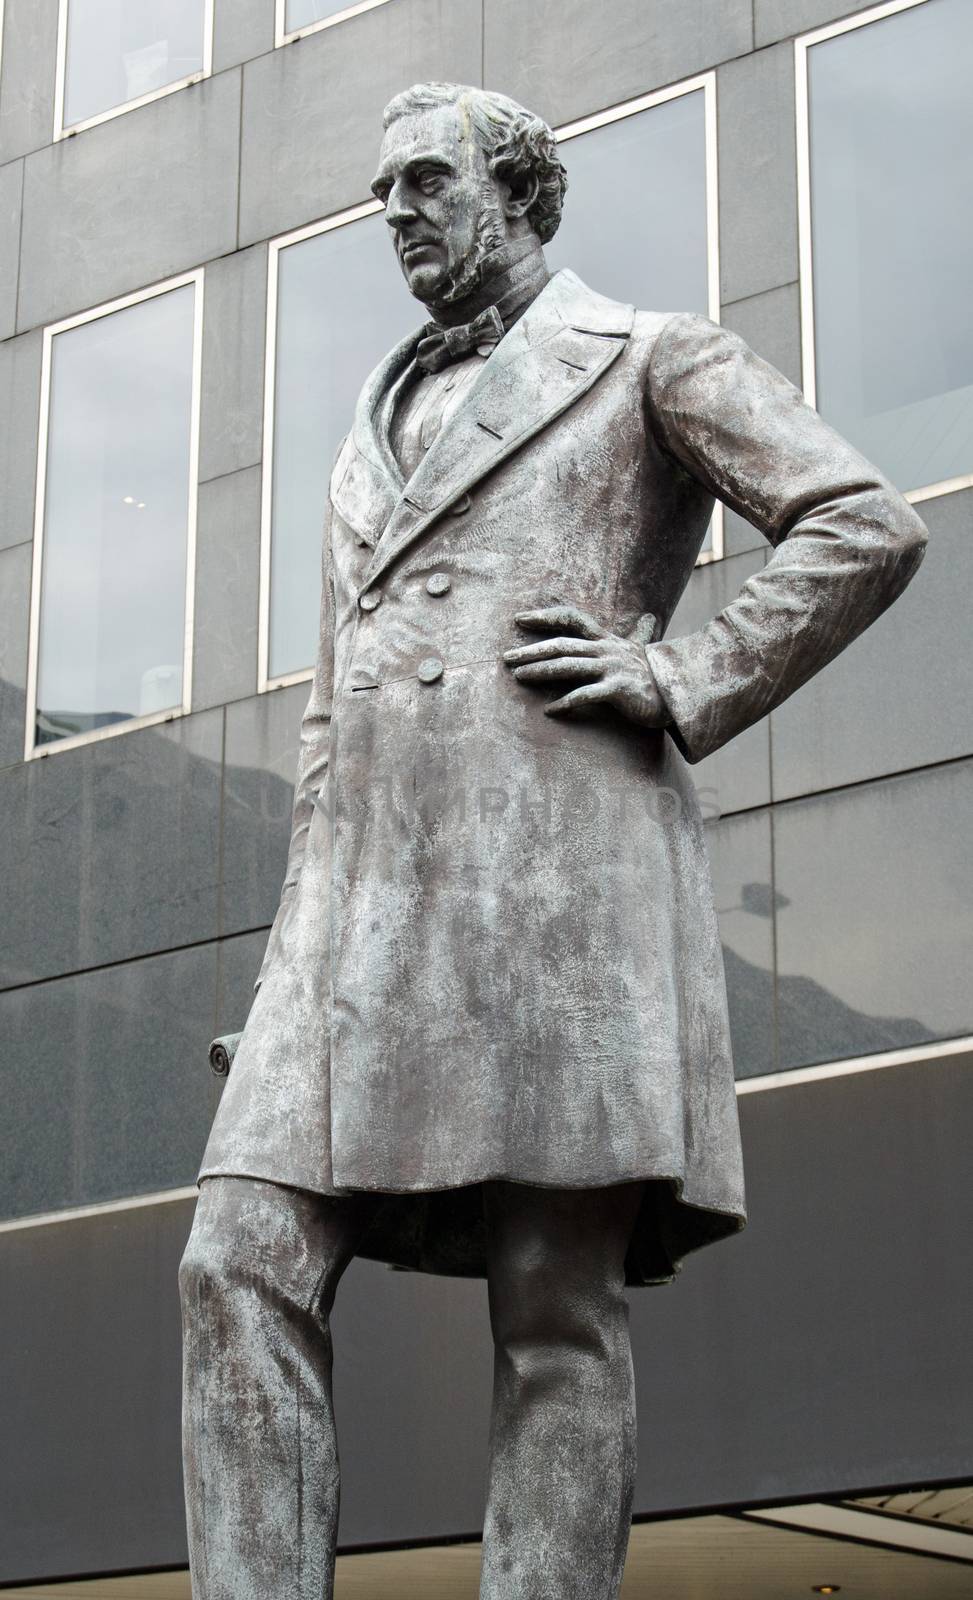 Statue of the Victorian railway engineer Robert Stevenson on peramanent public display outside Euston Railway station in London.  Sculpted in 1870 by Baron Carlo Marochetti.  